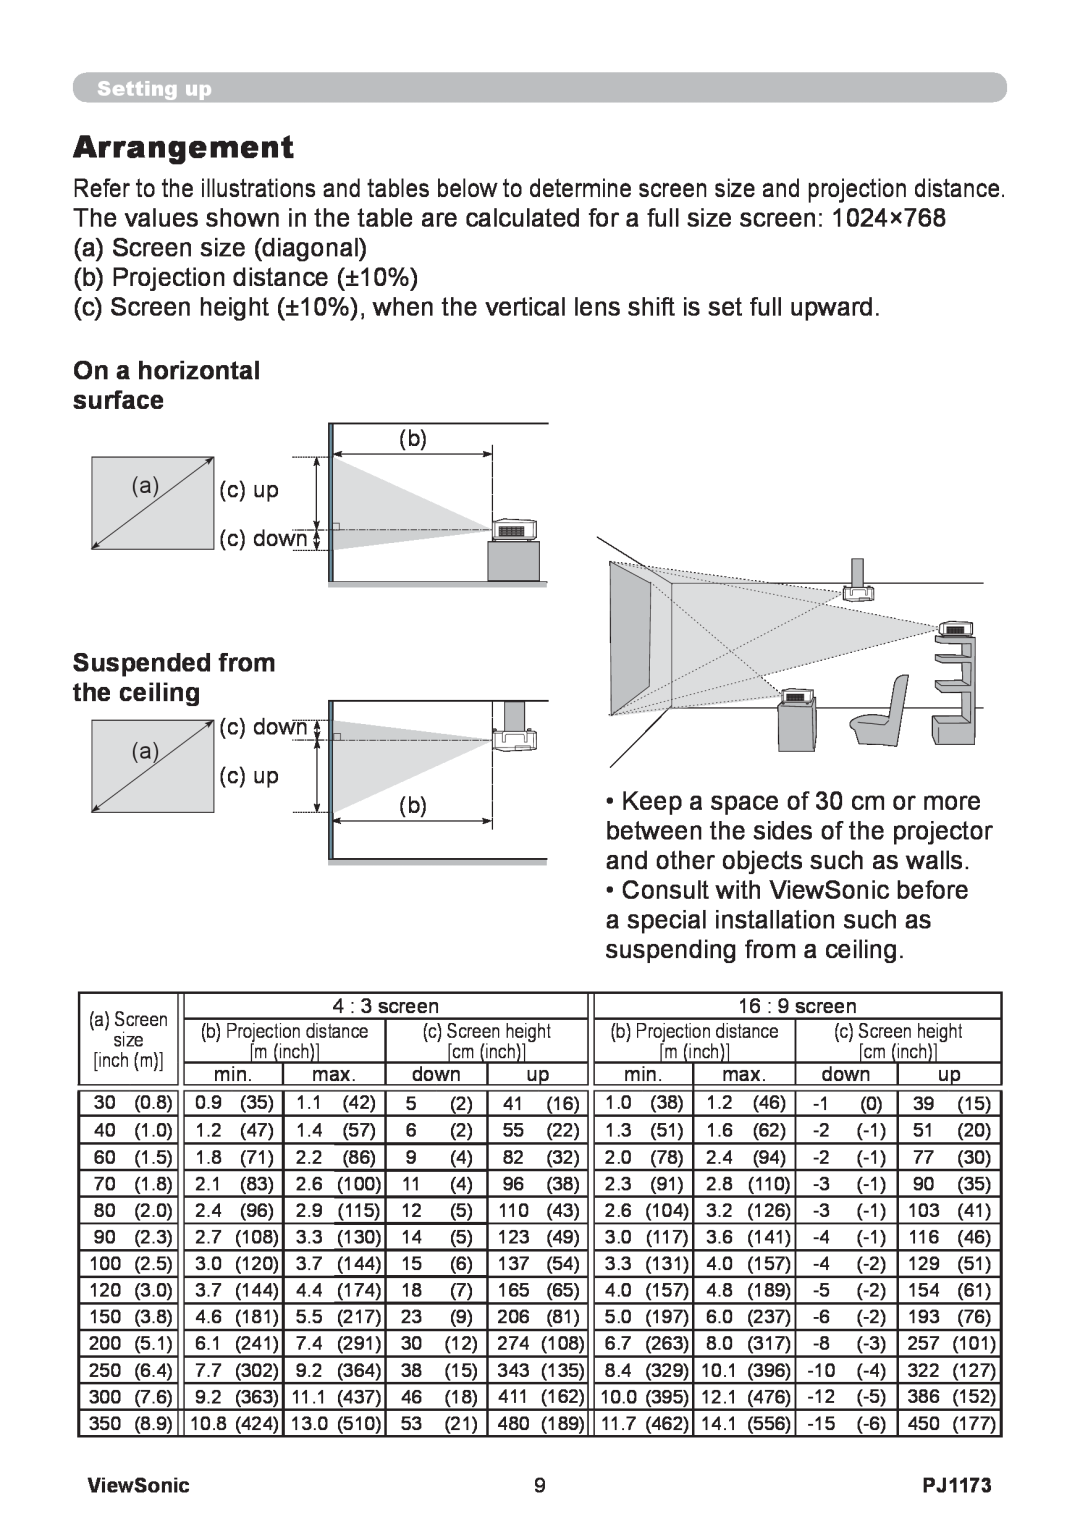 ViewSonic VS12109, PJ1173 warranty Arrangement, On a horizontal, surface, Suspended from the ceiling 